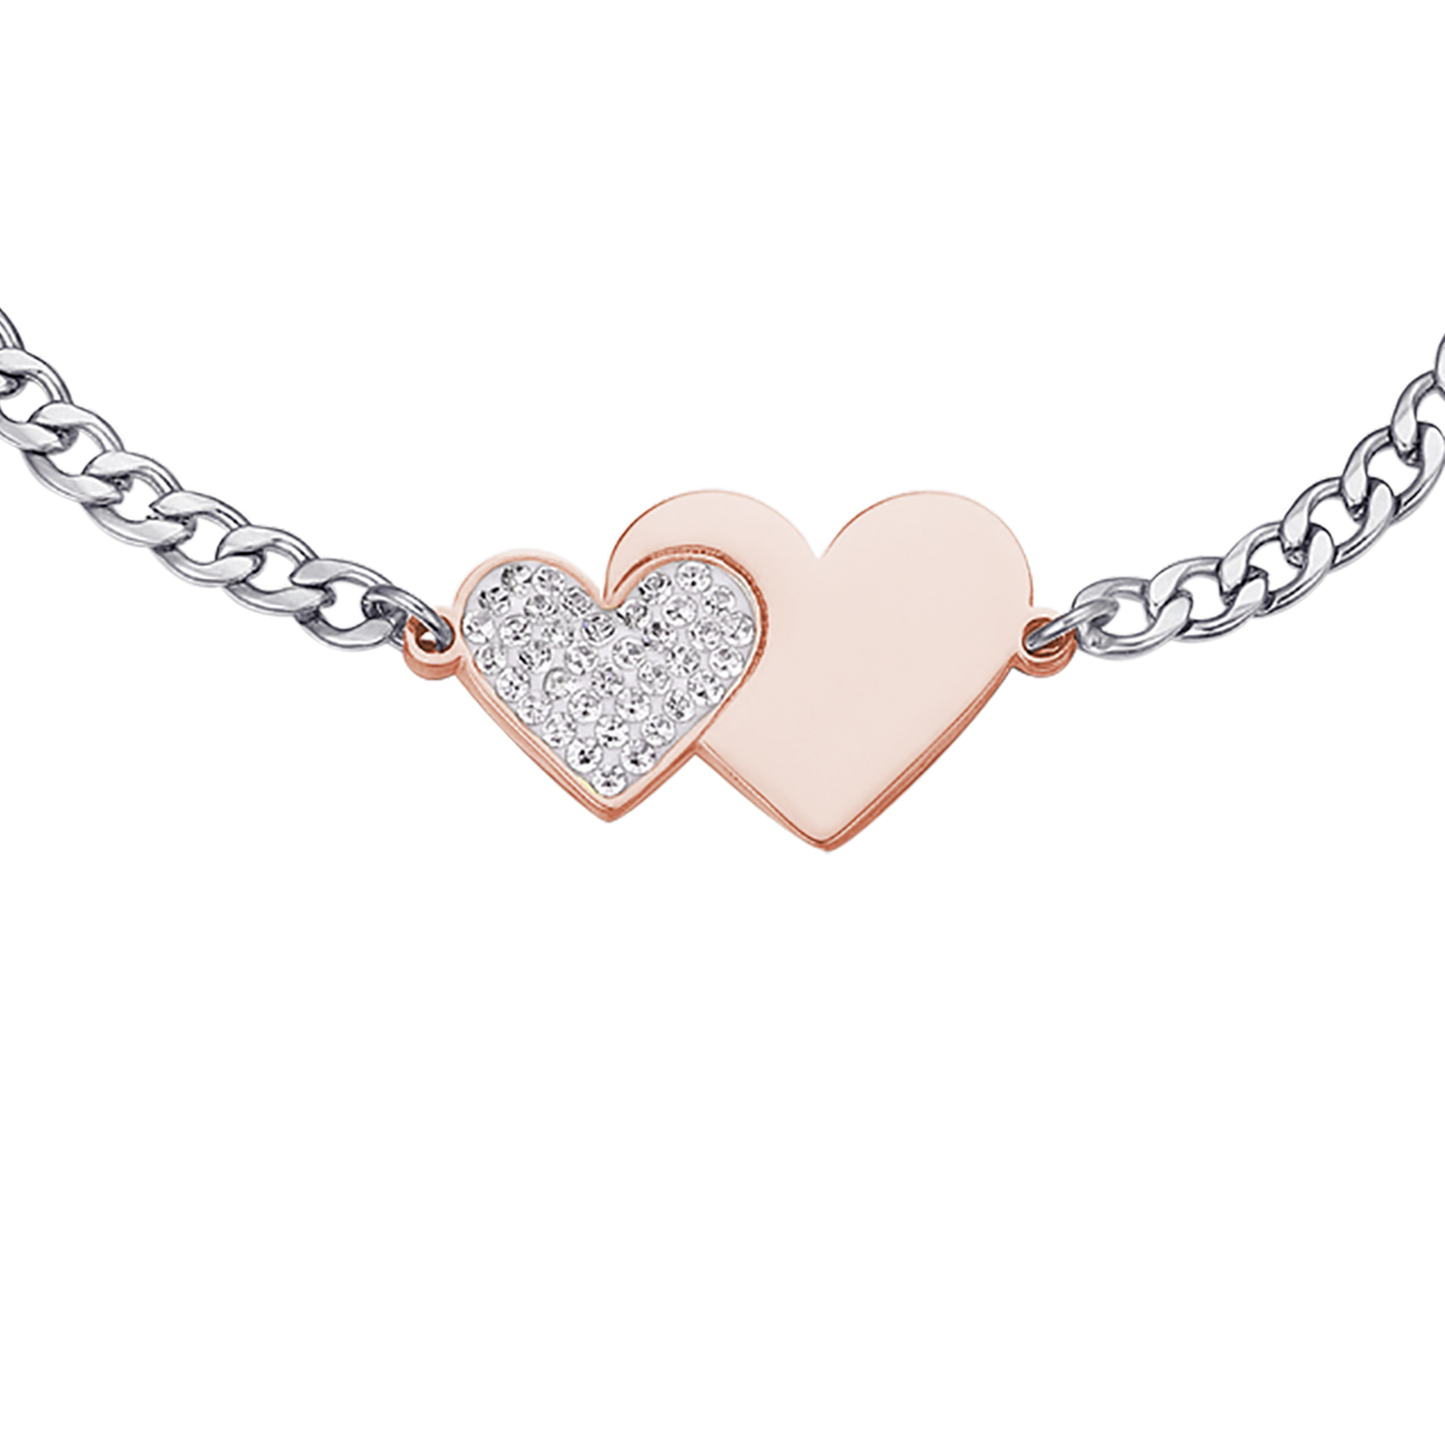 STAINLESS STEEL BRACELET WITH IP ROSE HEART AND WHITE CRYSTALS Luca Barra